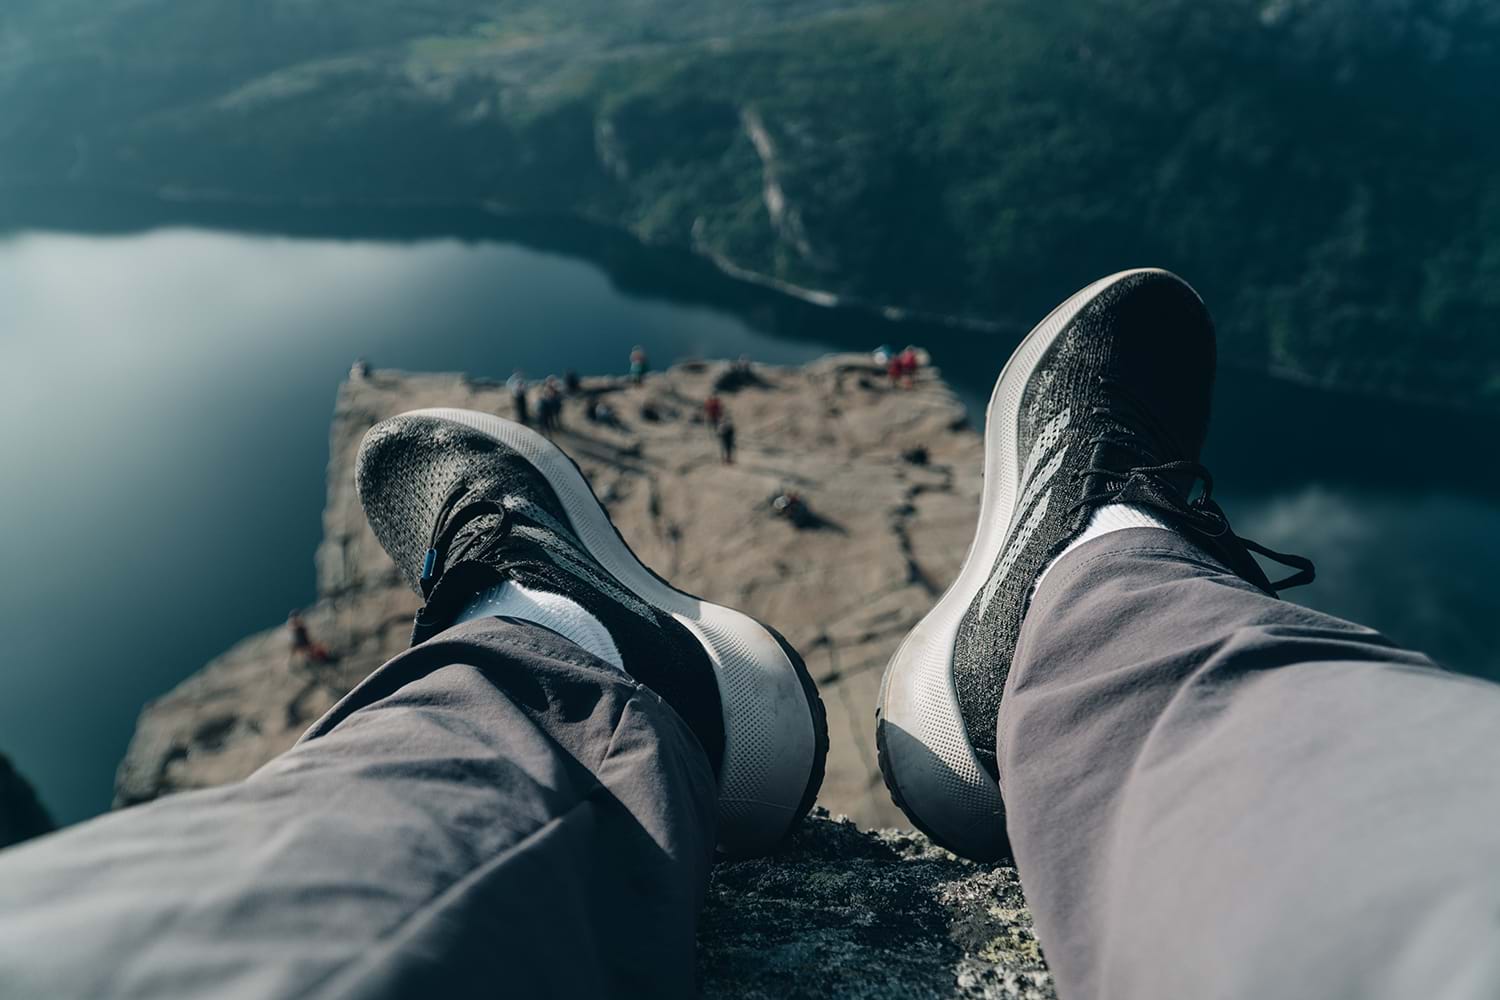 A person's feet on a cliff edge over a lake